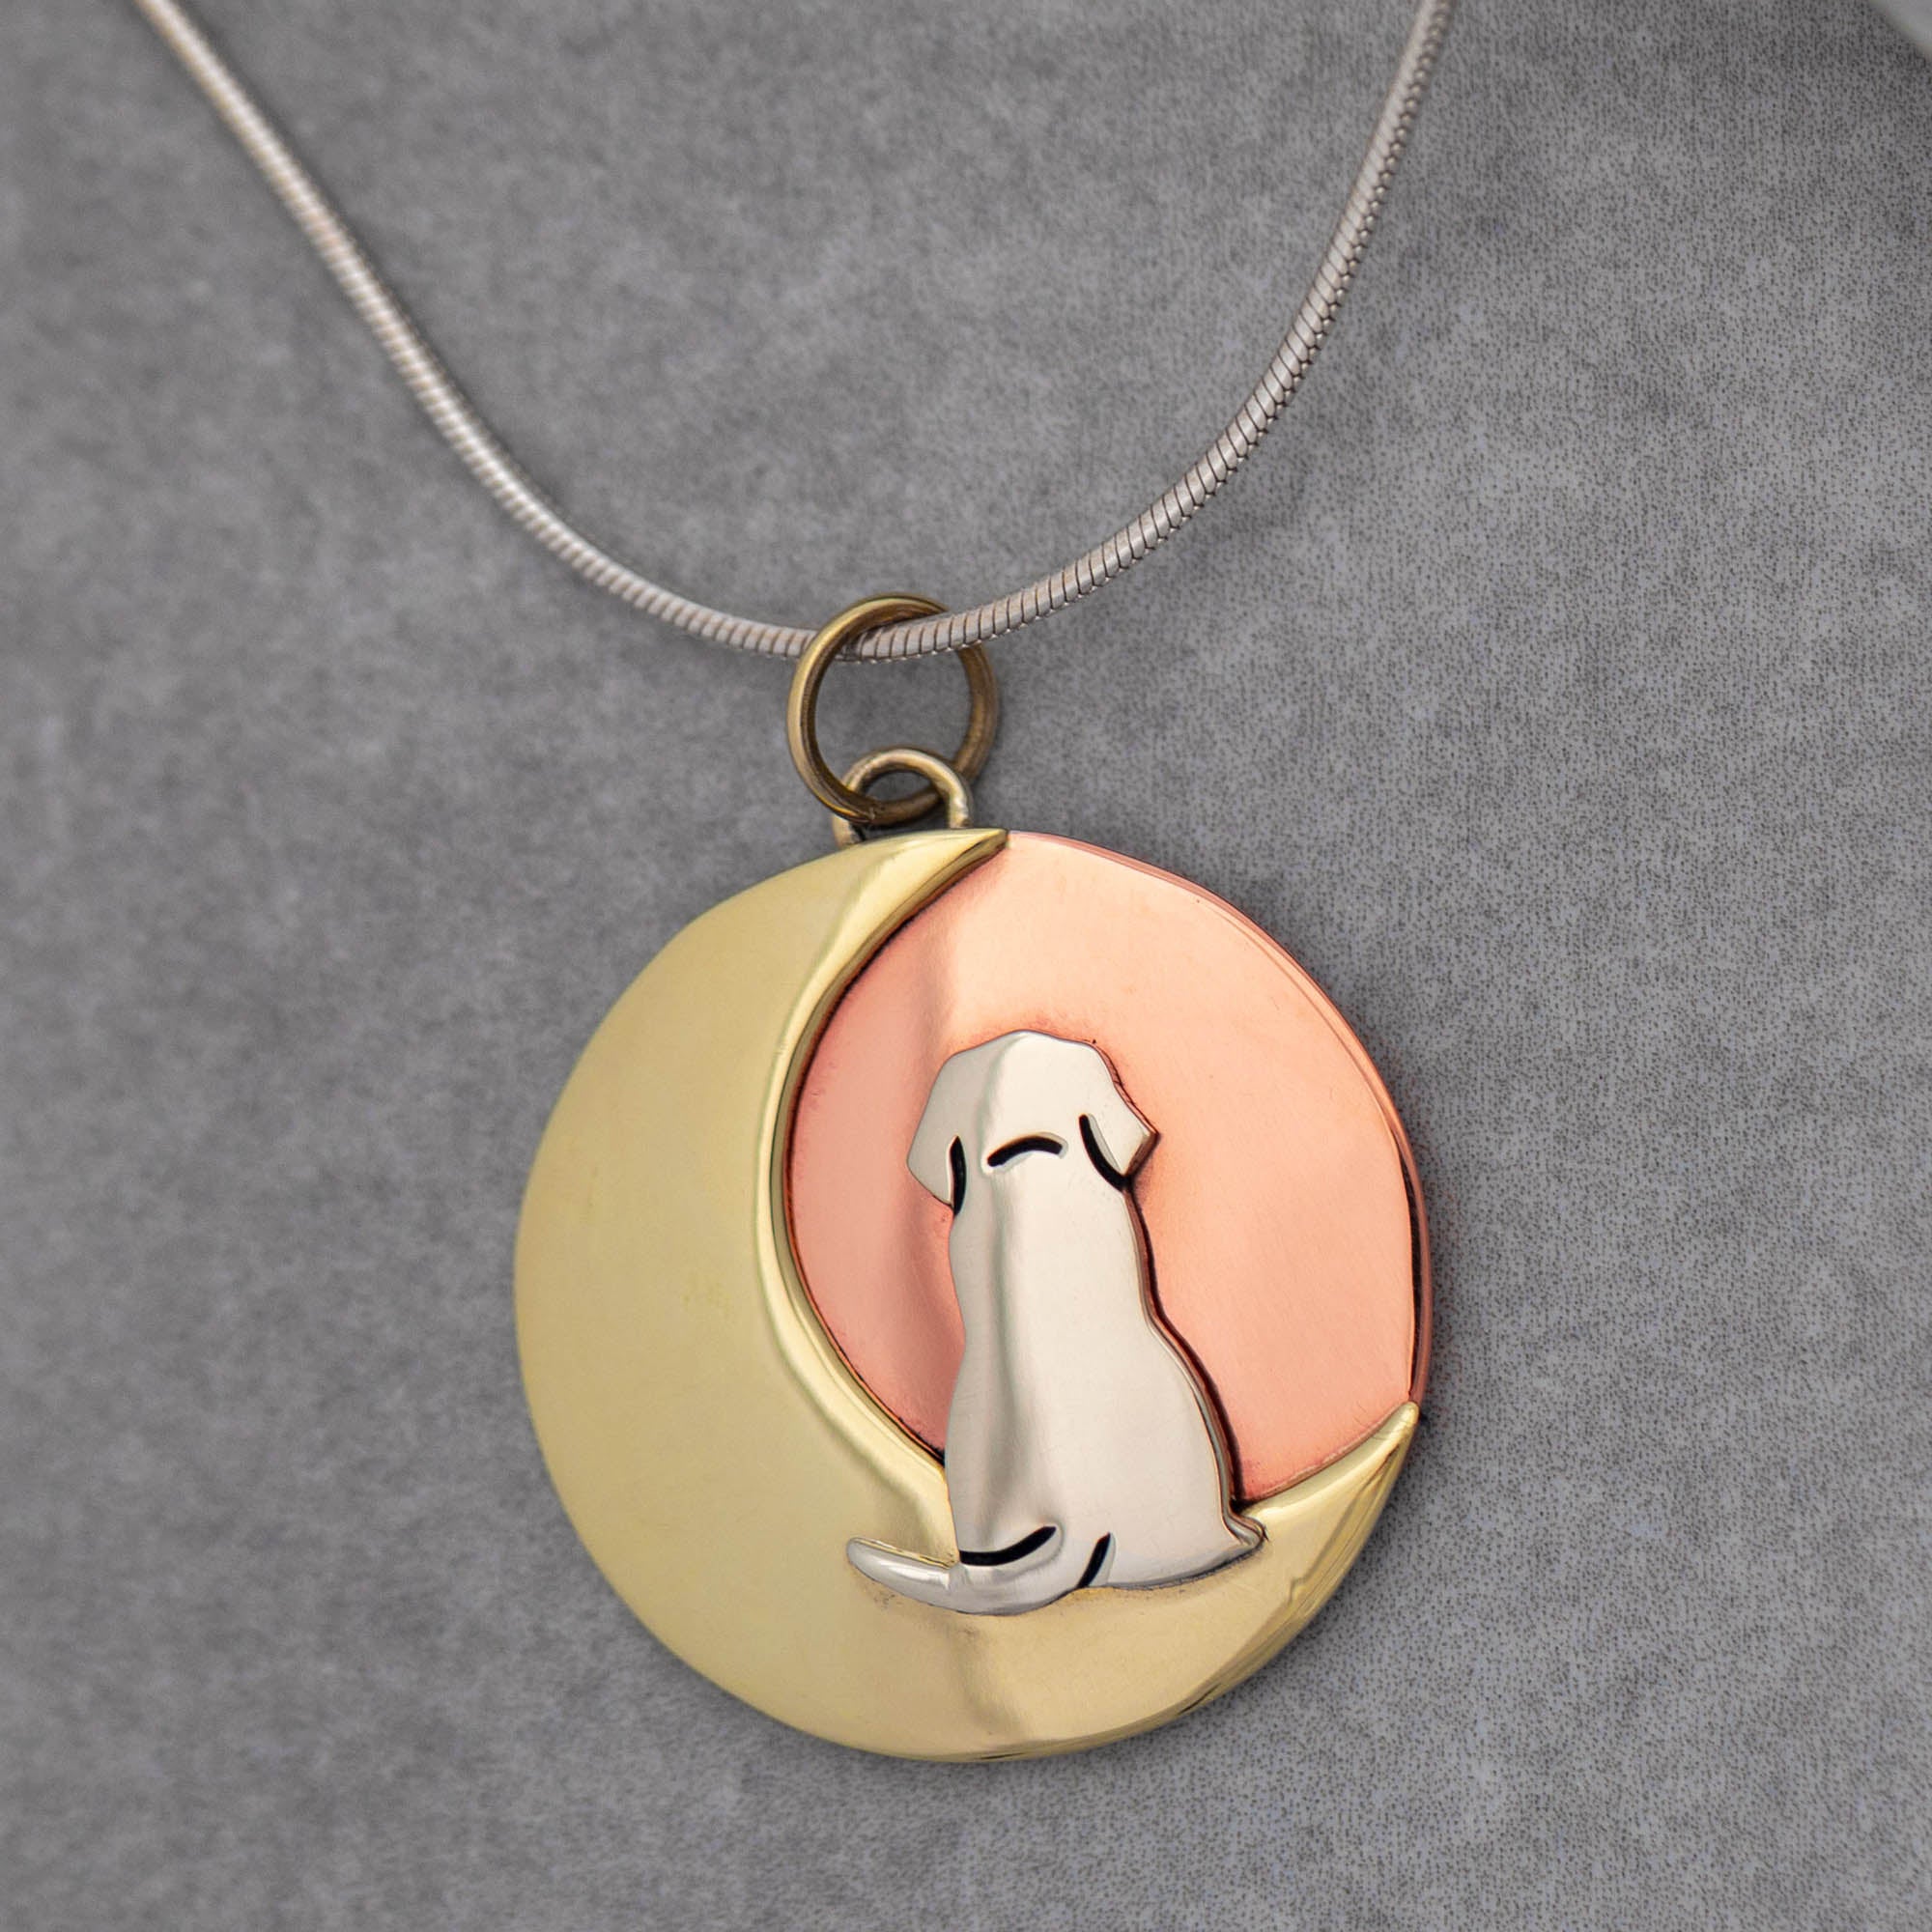 Moonlight Dog Necklace - Pendant Only